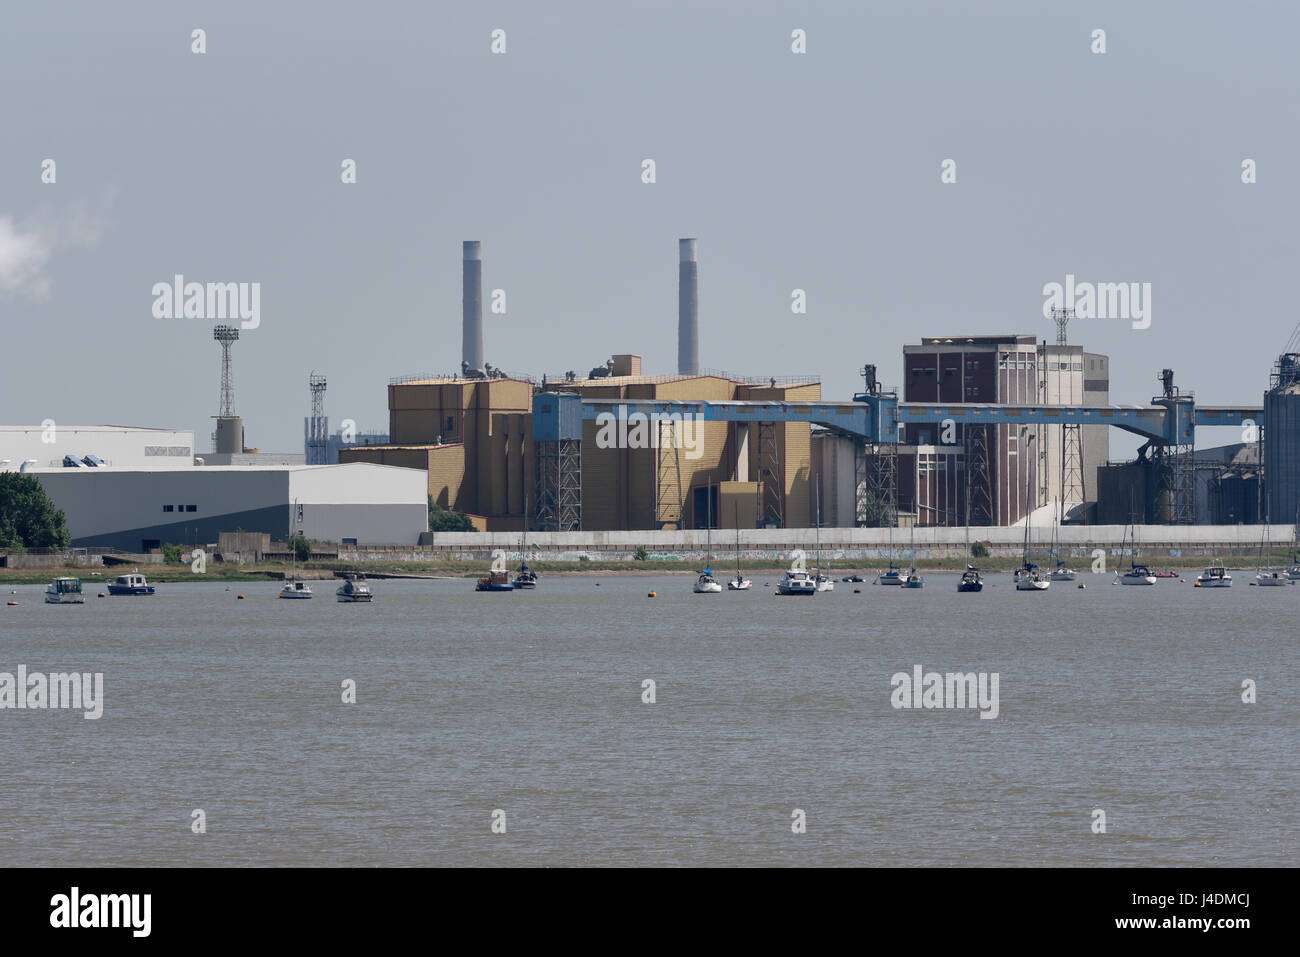 Thames Grain Elevators Grain Terminal in Tilbury Docks, on the River Thames in Essex, with storage silos Stock Photo